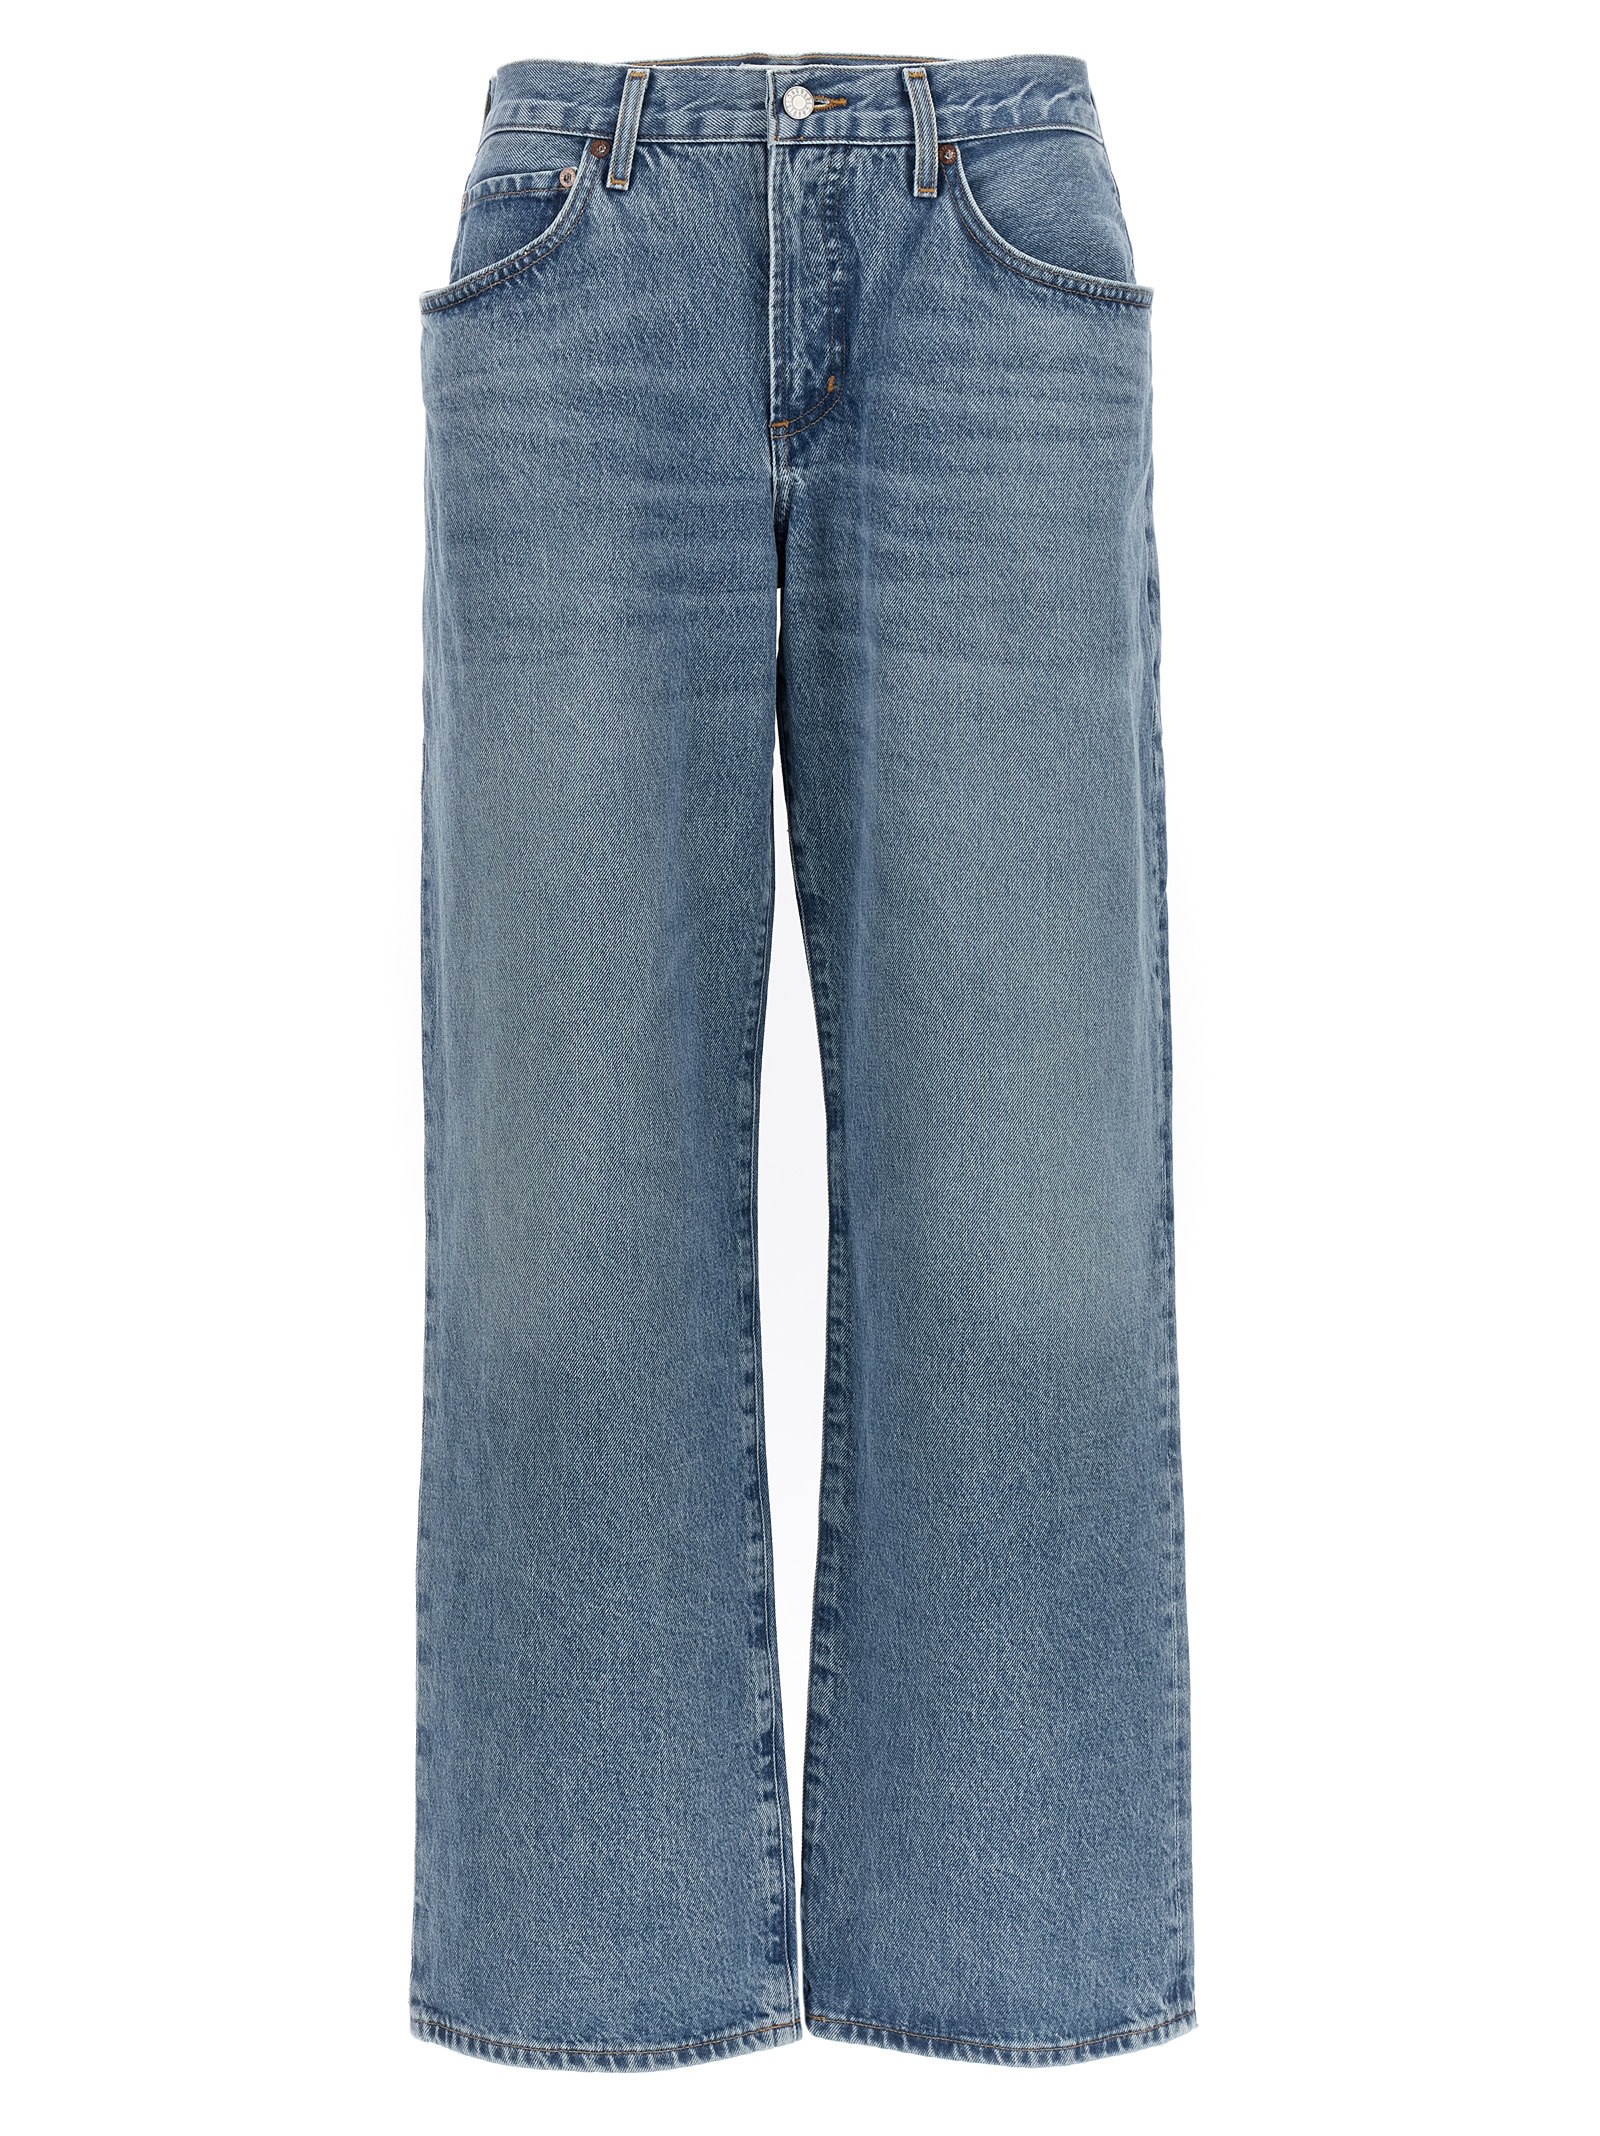 AGOLDE FUSION JEANS